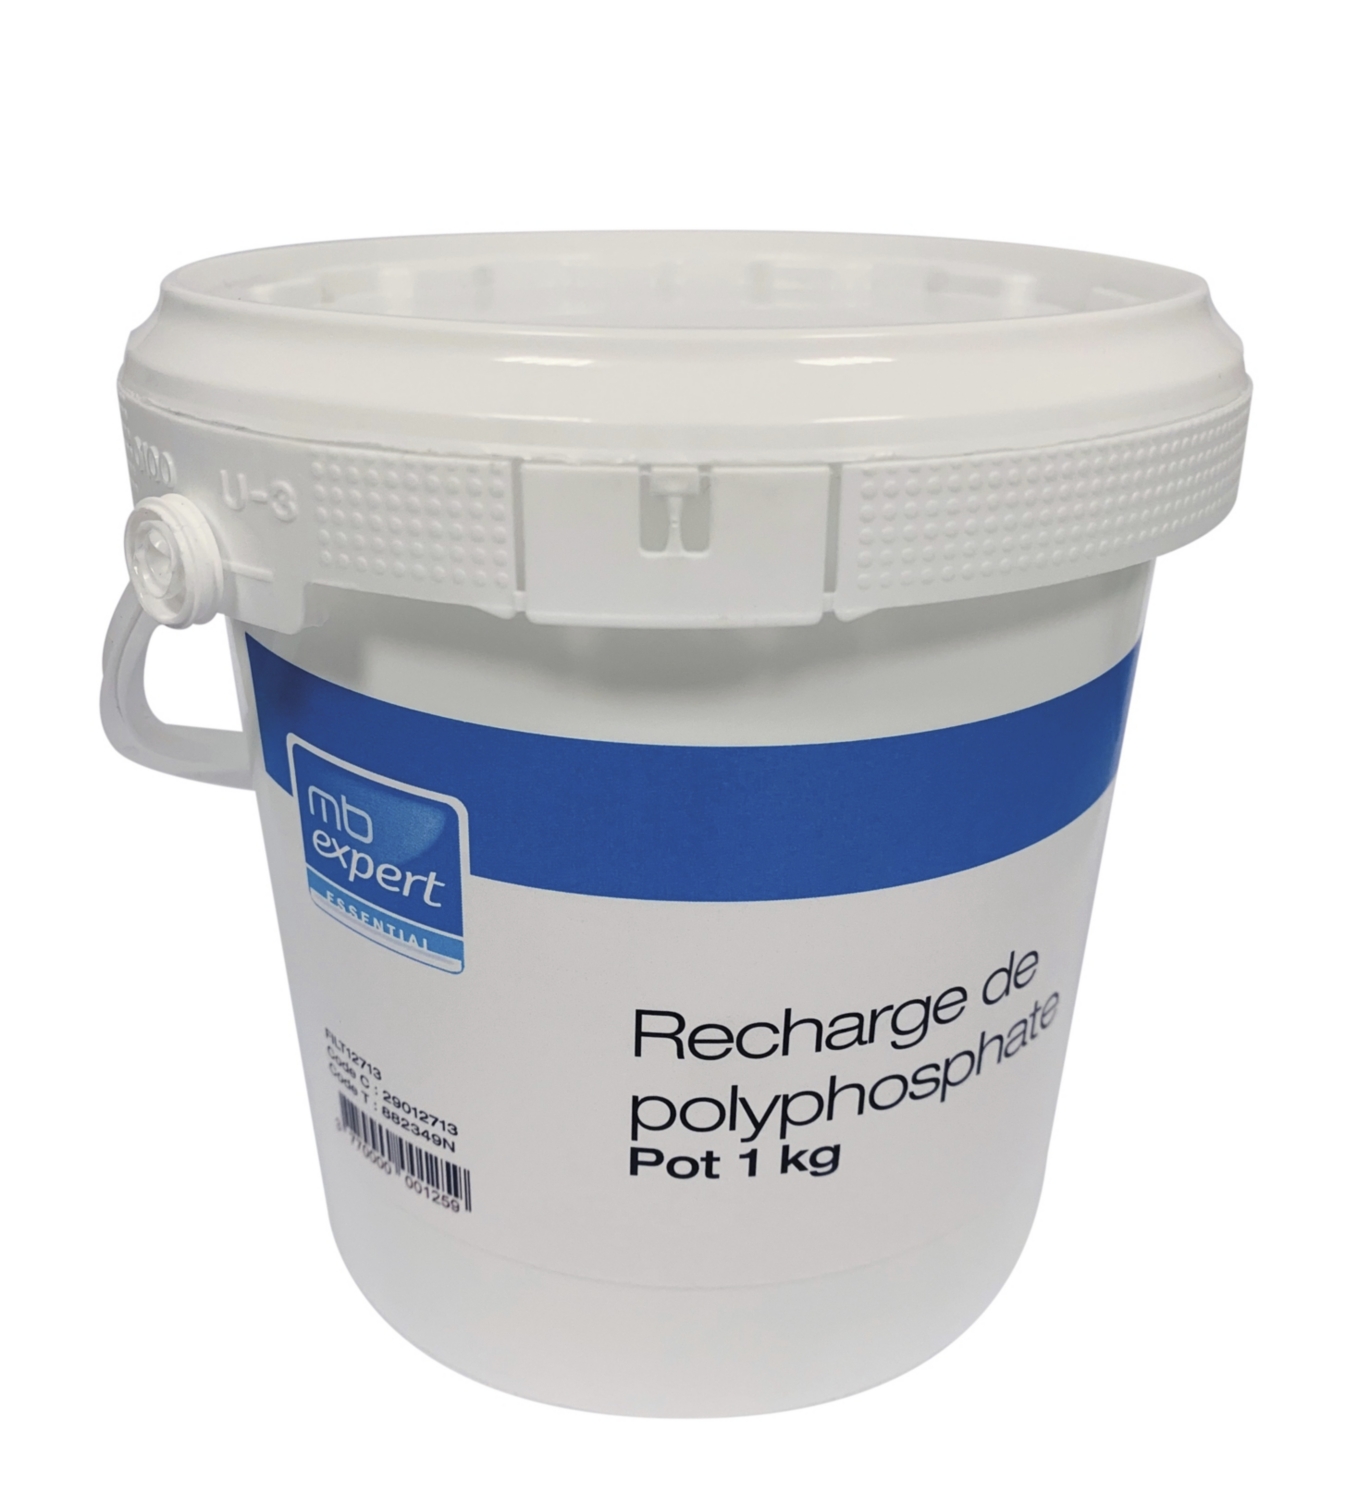 Recharge polyphosphate MB Expert